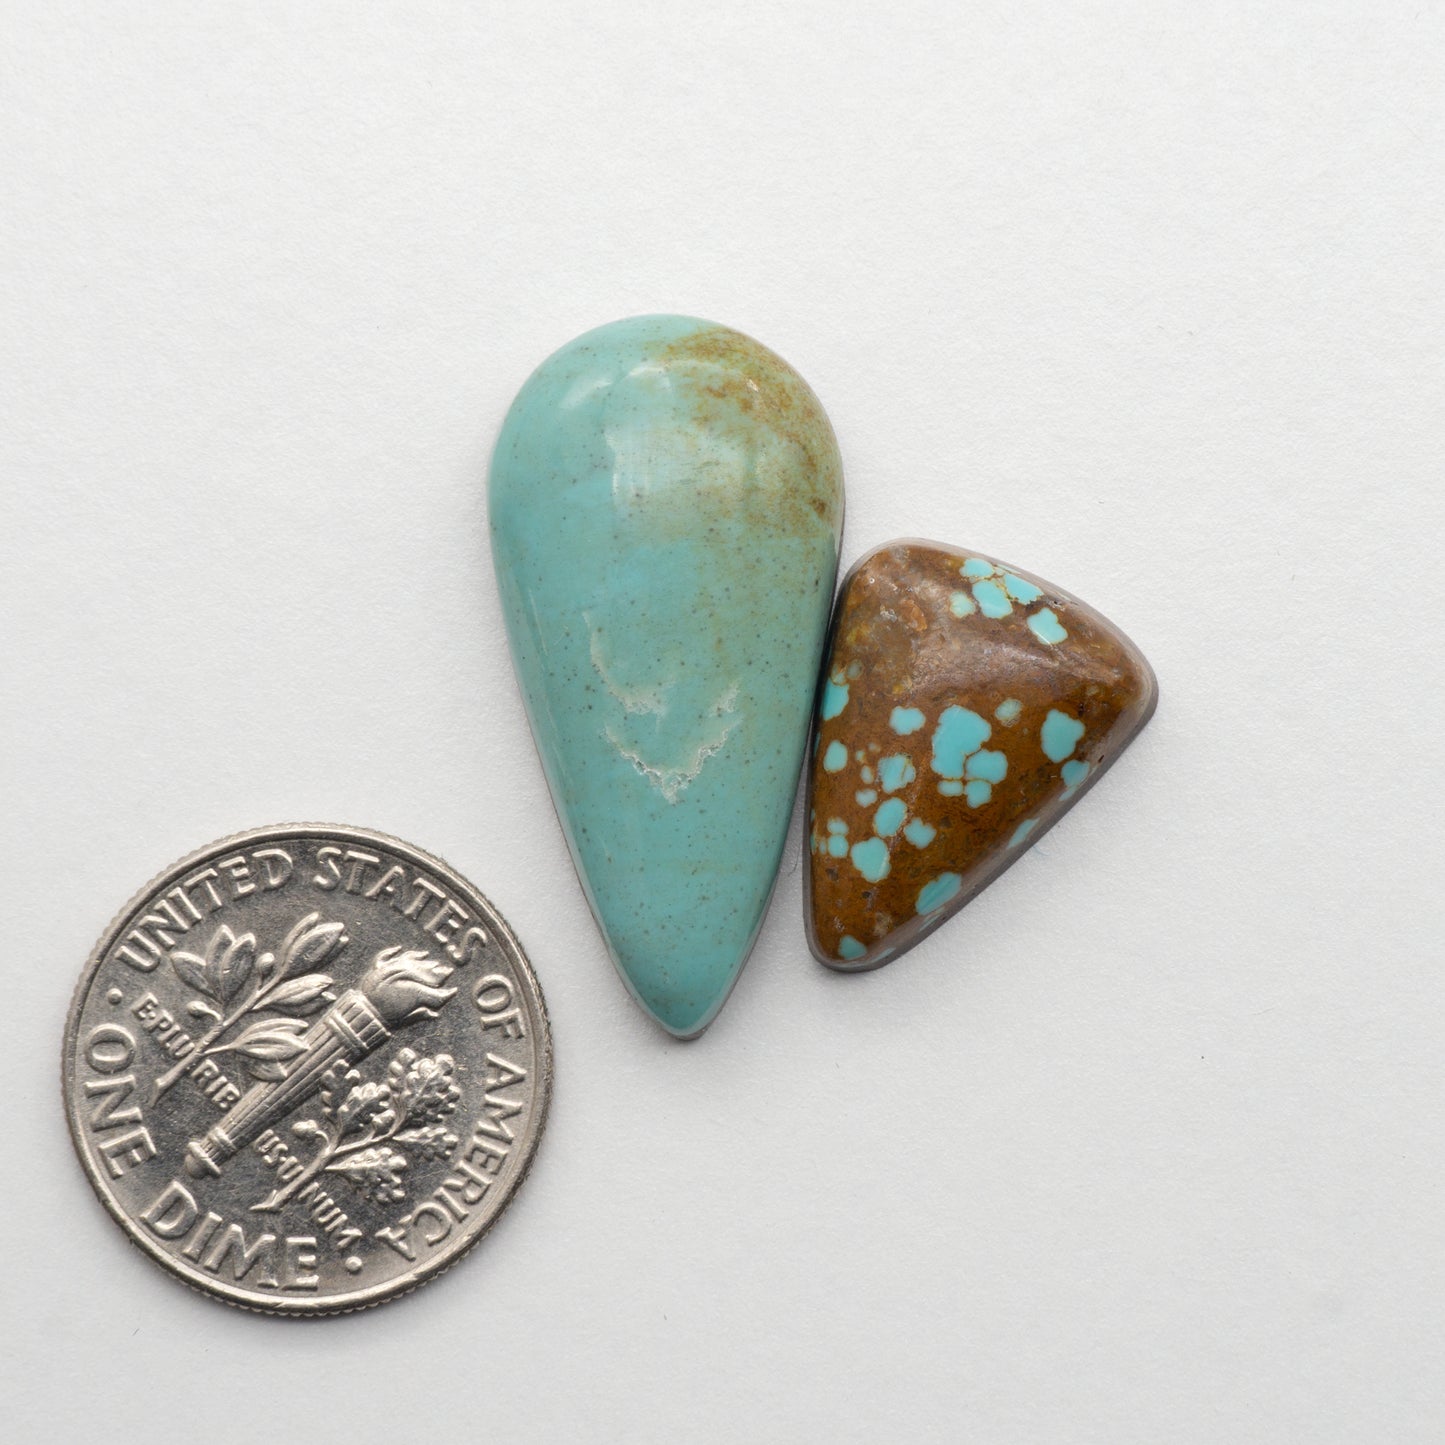 This Number 8 Turquoise Cabochon lot is an excellent addition to any jewelry-making collection. This set includes cabochons of the highest quality, with great attention to detail to ensure each stone is stunningly unique. Thanks to the intricate patterning.